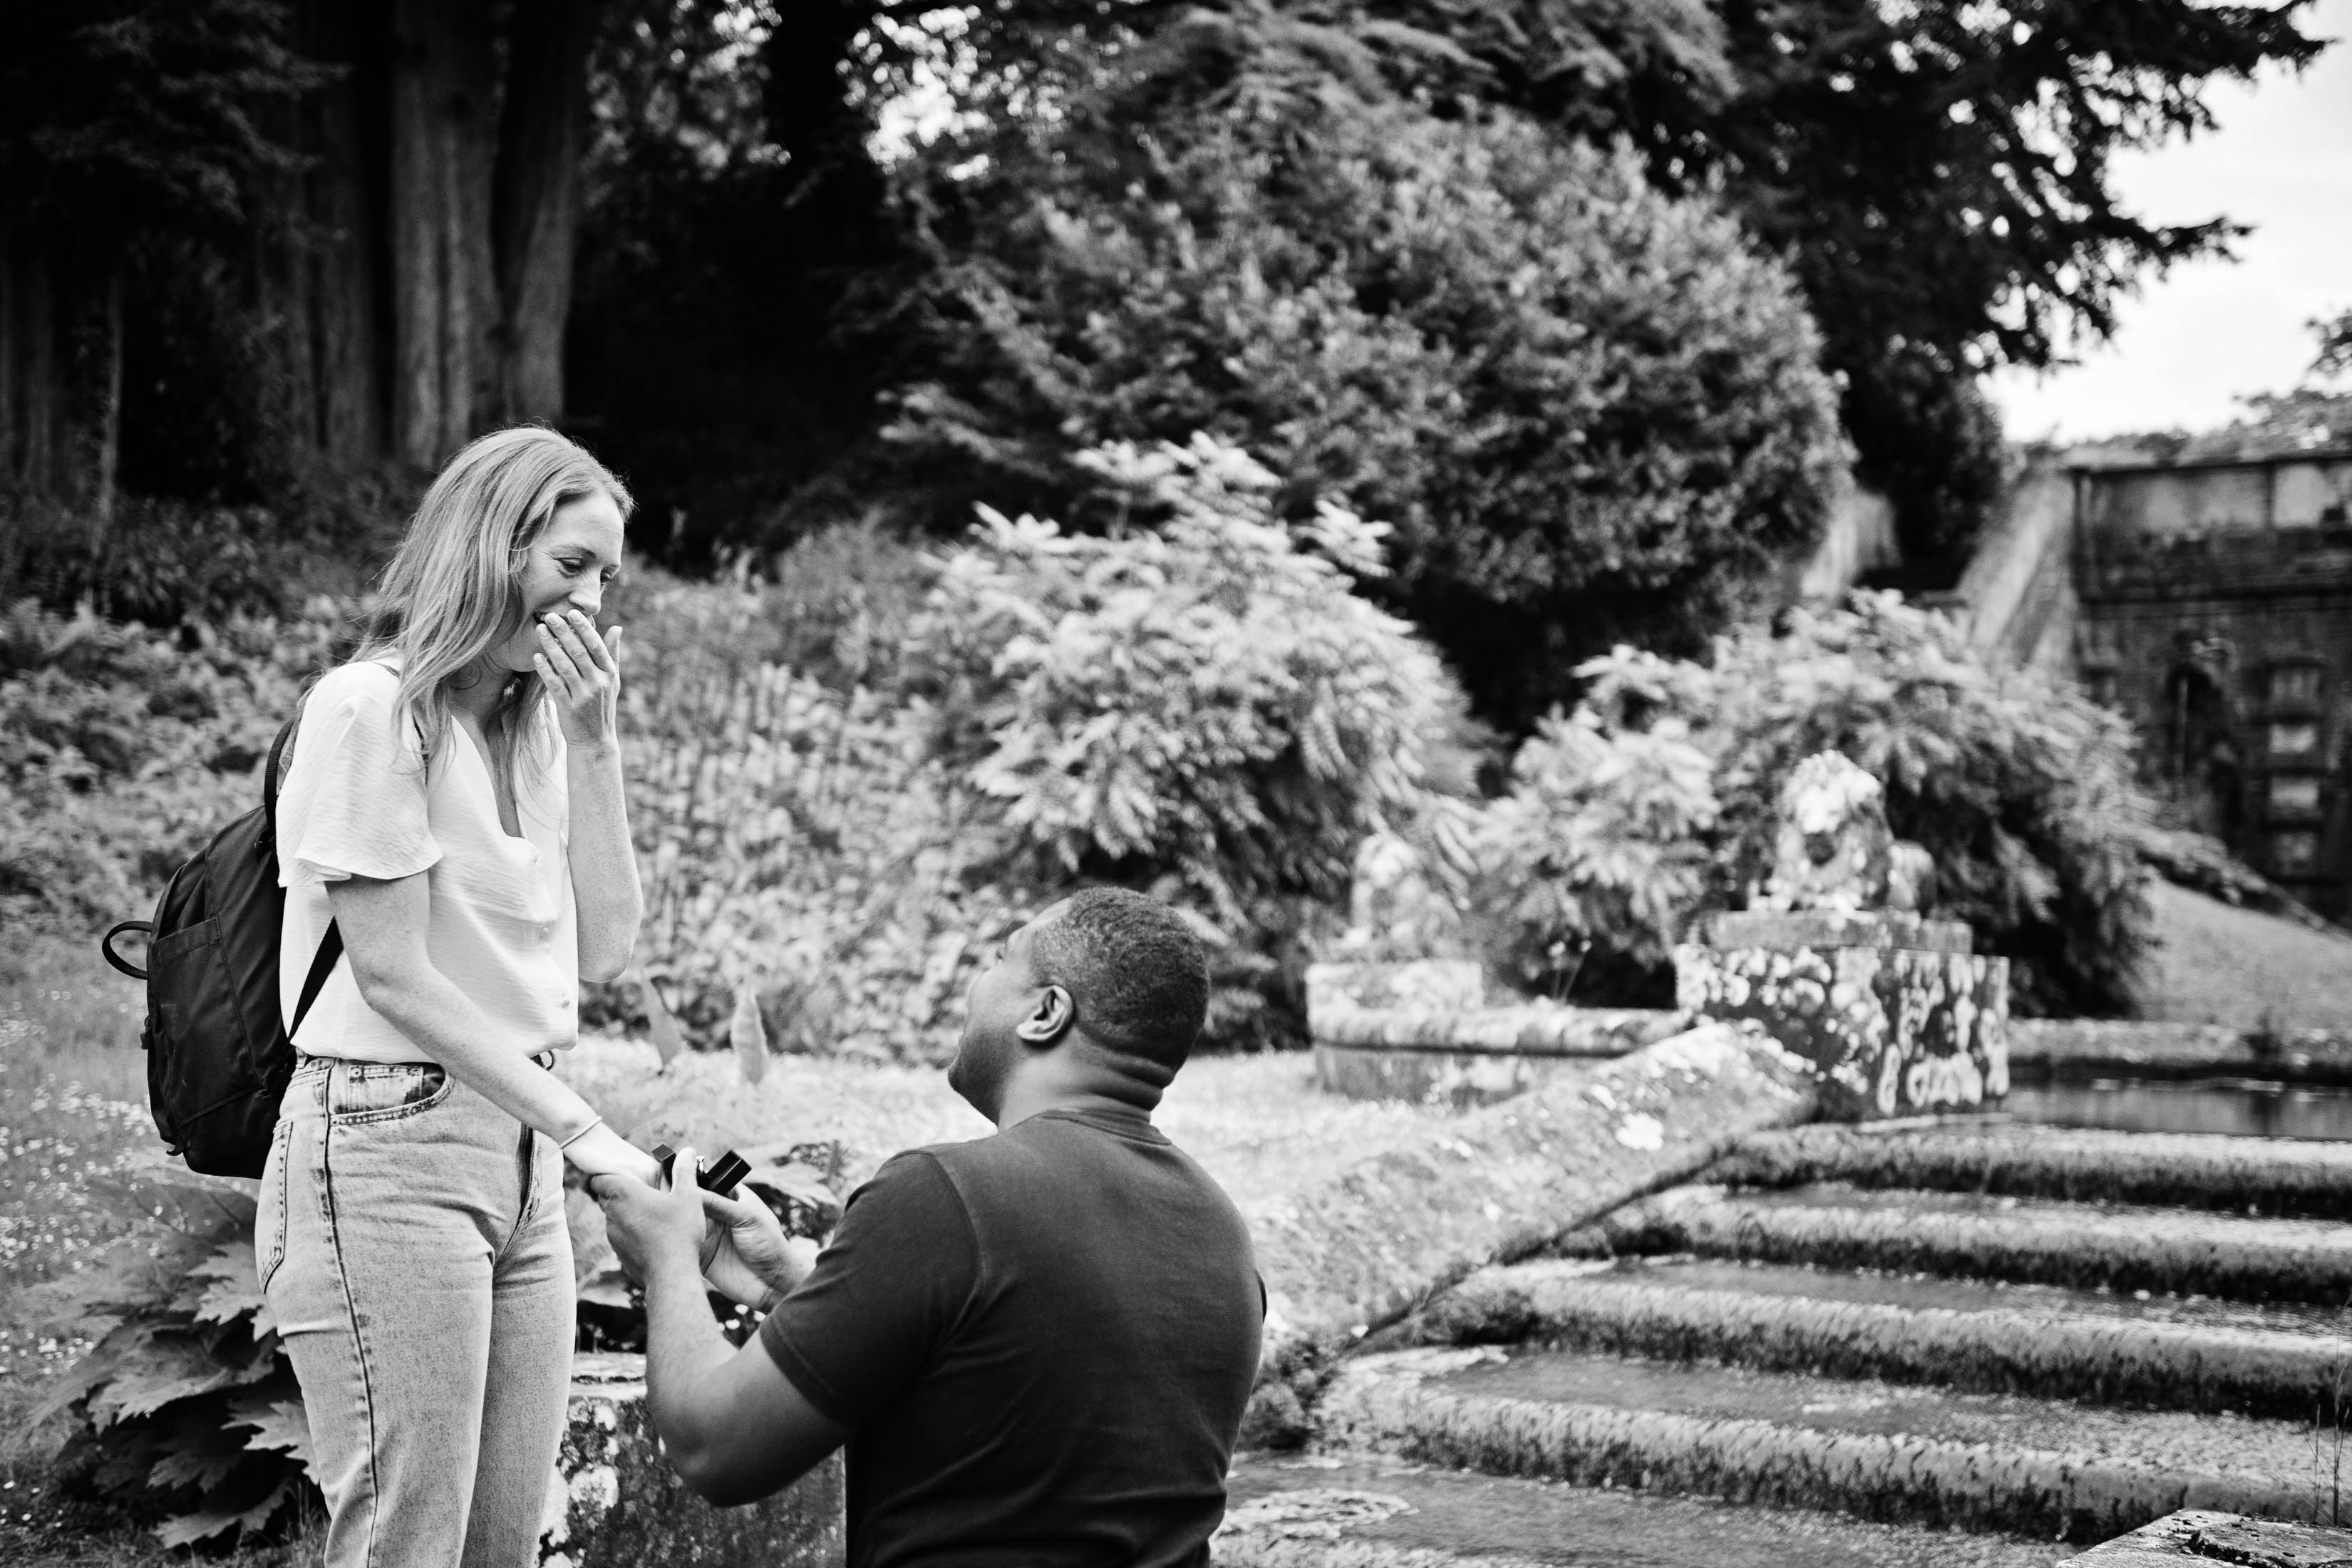 Tobi gets down on one knee and proposes to his girlfriend. Taken at Cowley Manor